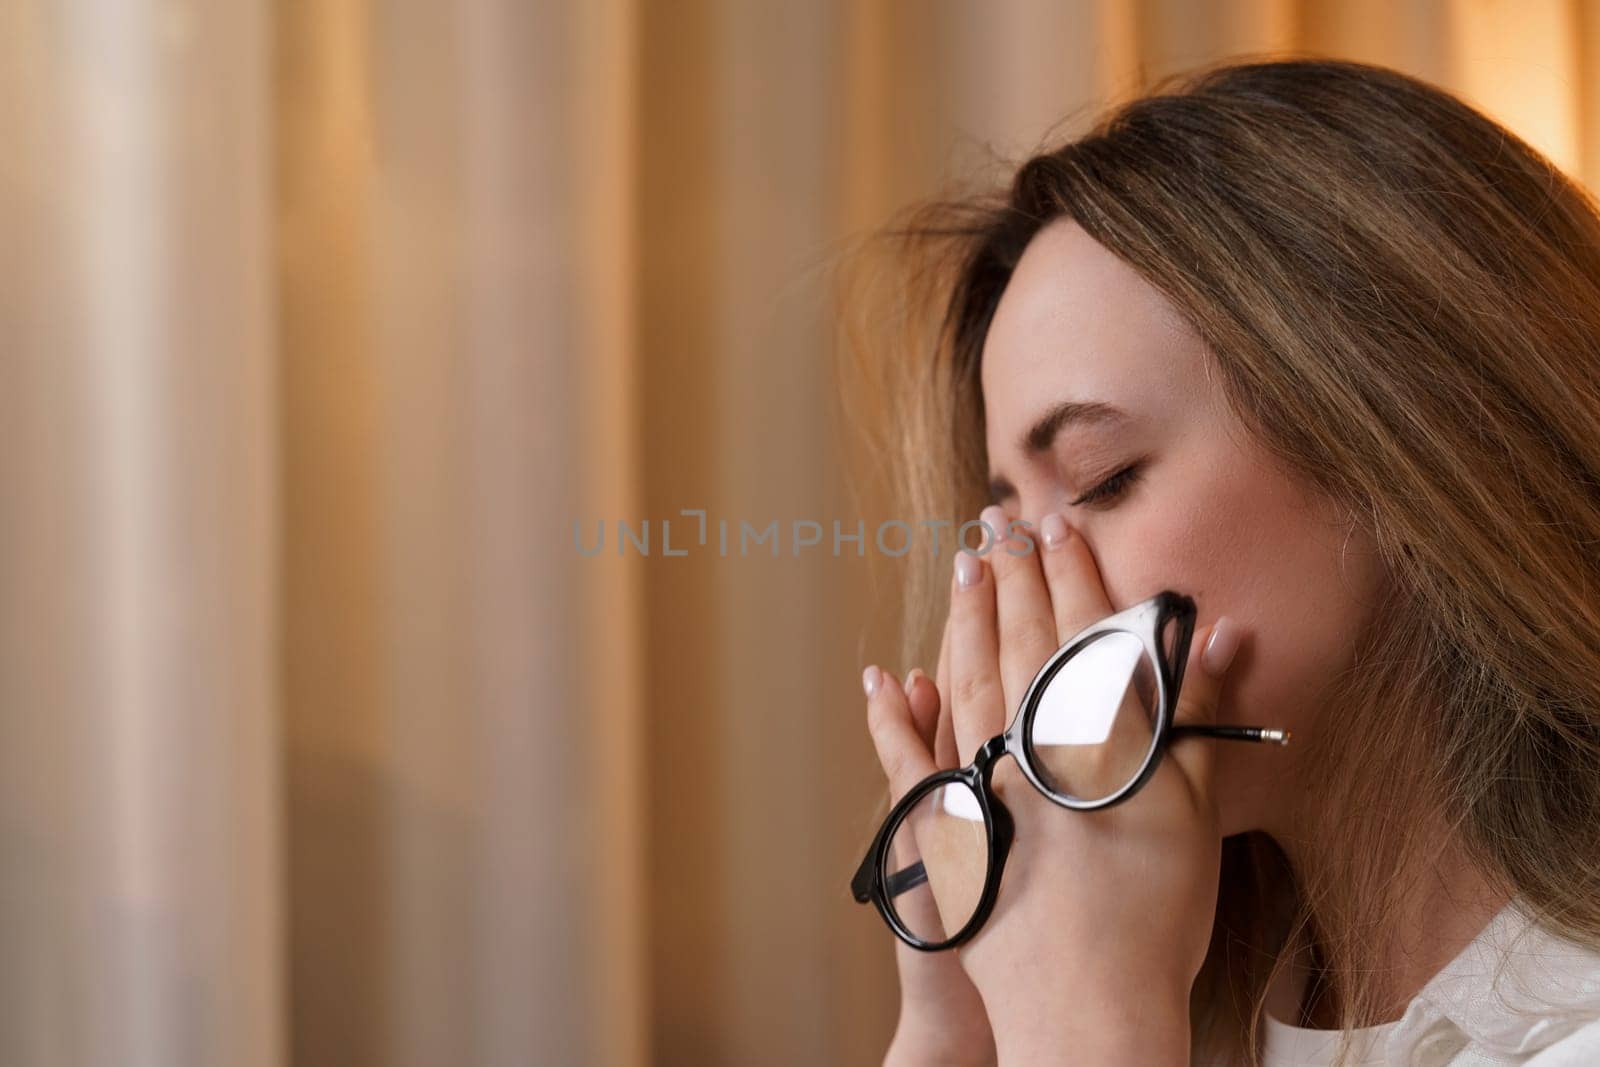 Young woman rubs her eyes, suffers from eye fatigue, holding glasses in her eyes. Concepts of eye diseases